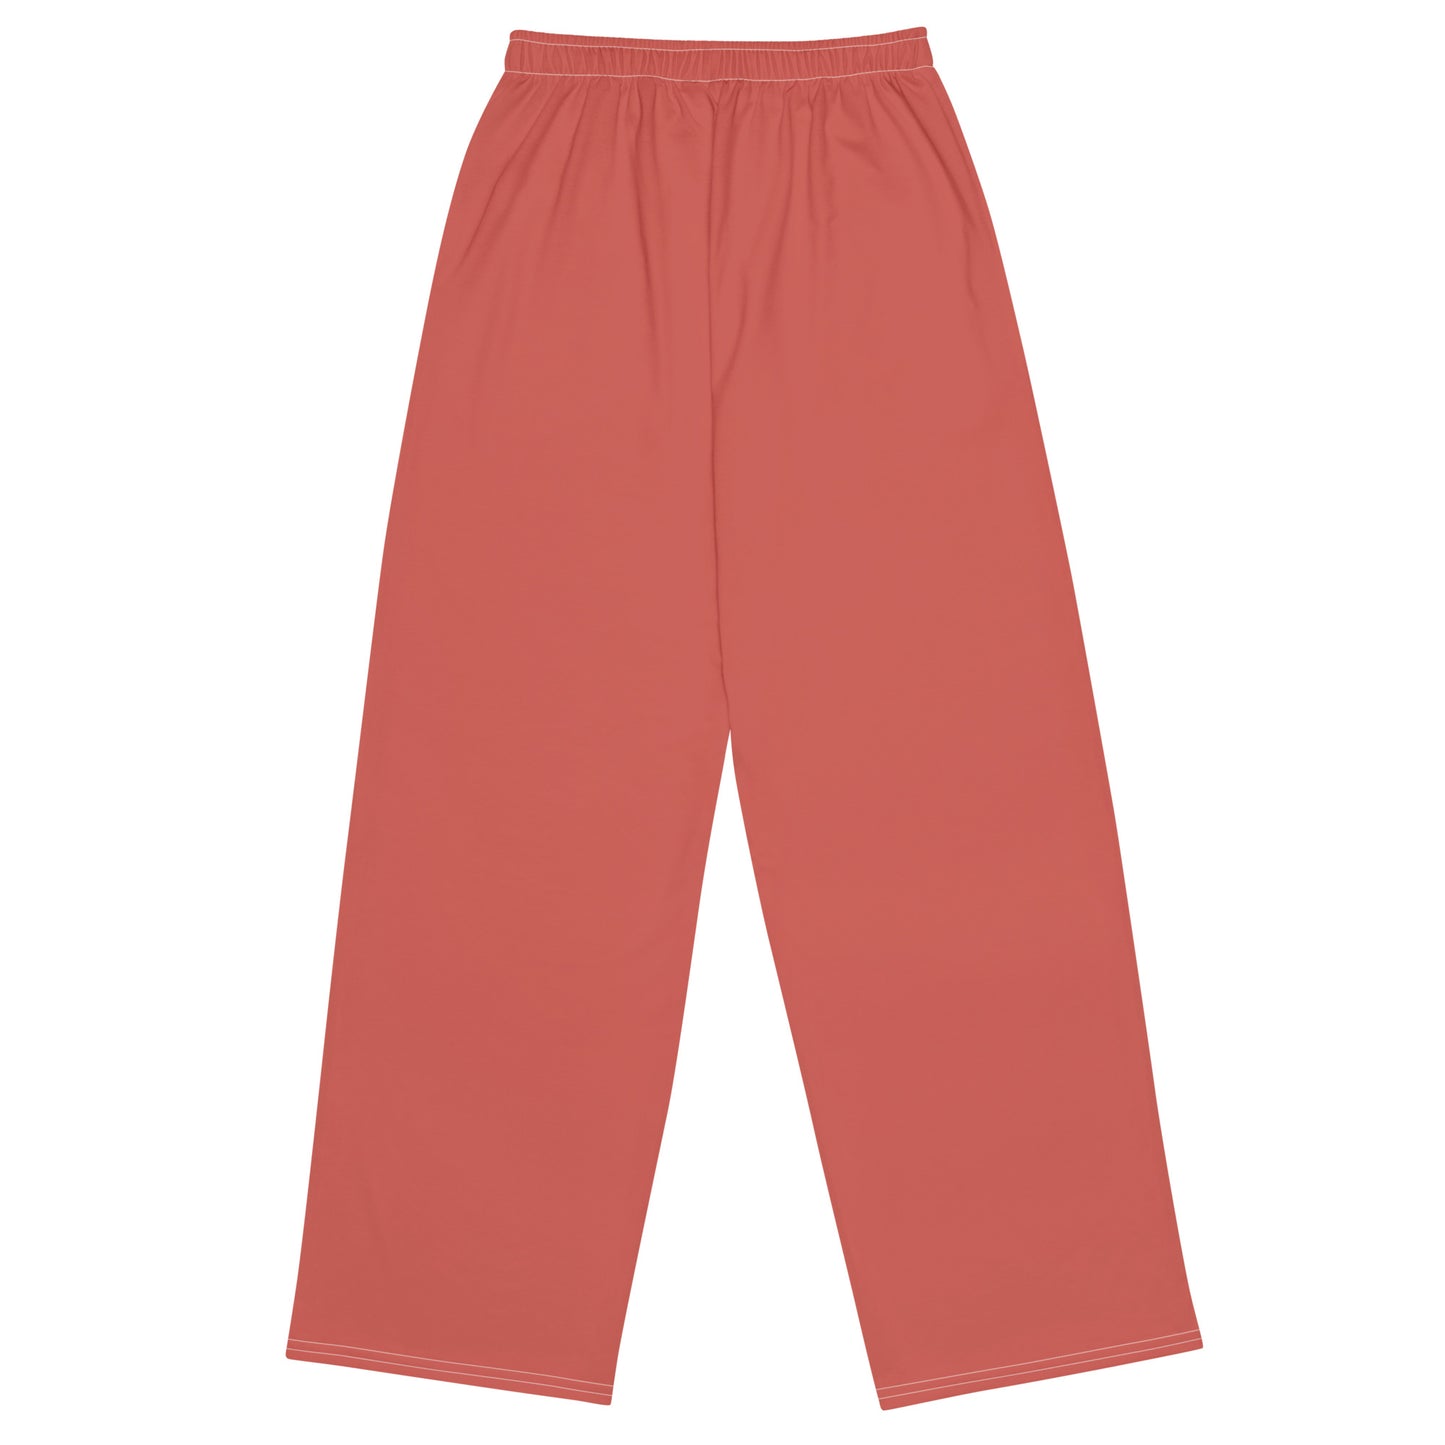 Heart - Inspired By Taylor Swift - Sustainably Made unisex wide-leg pants